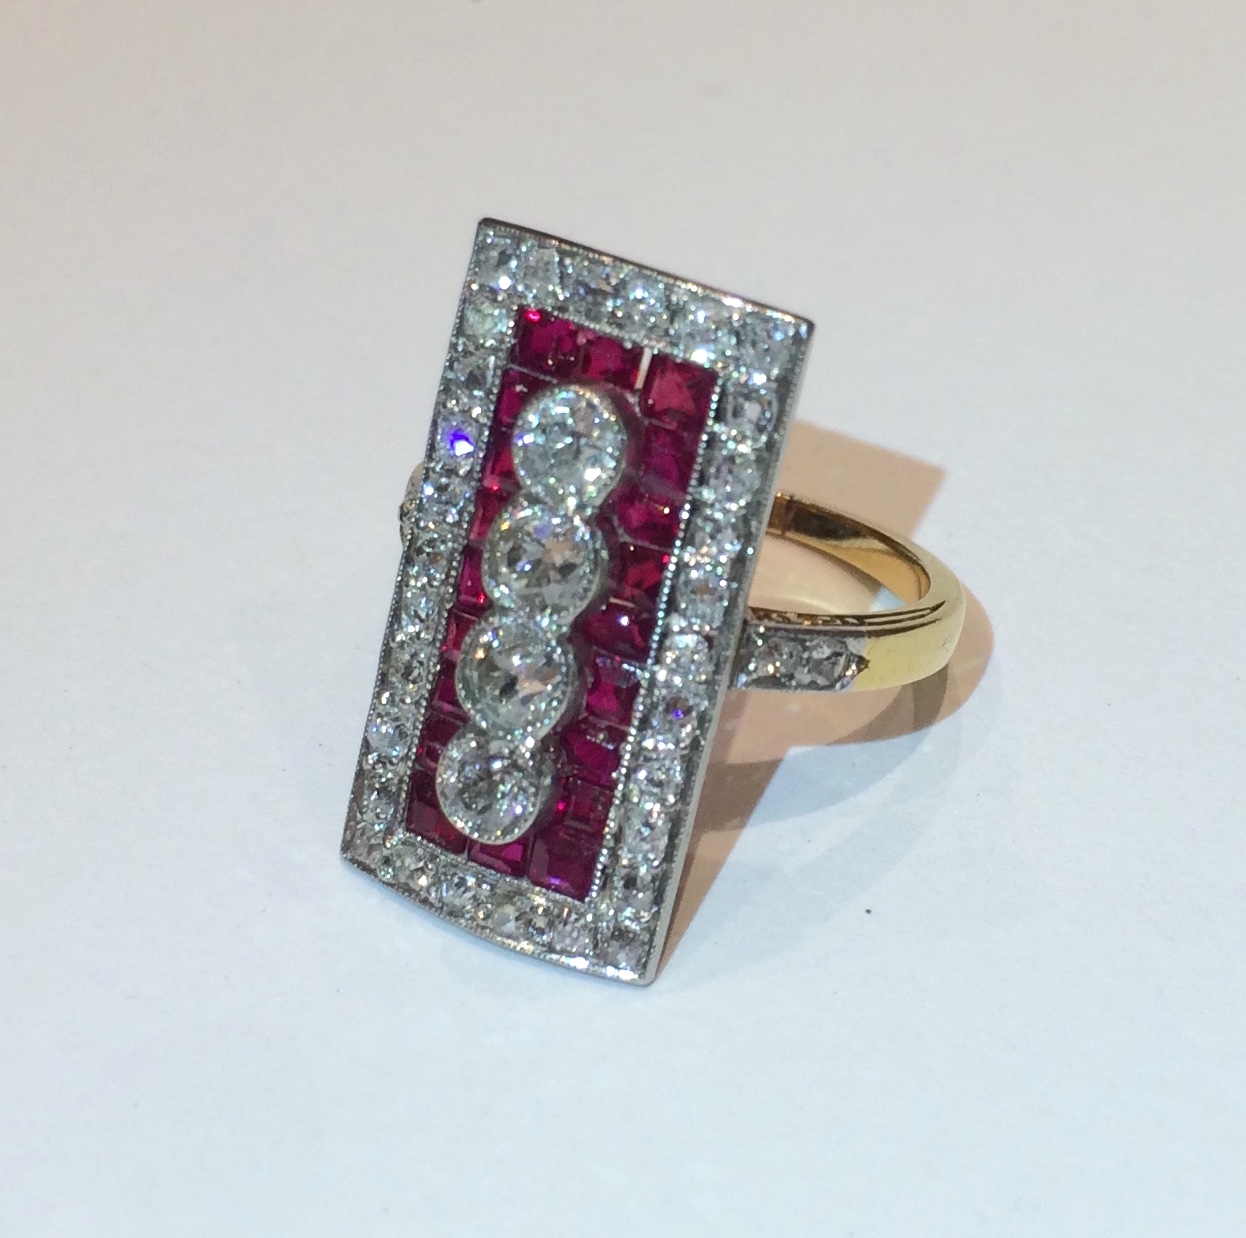 Art Deco ruby and diamond ring set in platinum topped 18k yellow gold, four round diamonds (approx. 1 carat TW) set with 20 square and caliber cut natural rubies (approx. 3 carats TW) further set with 34 round diamonds (approx. 2.50 carats TW) c.1920